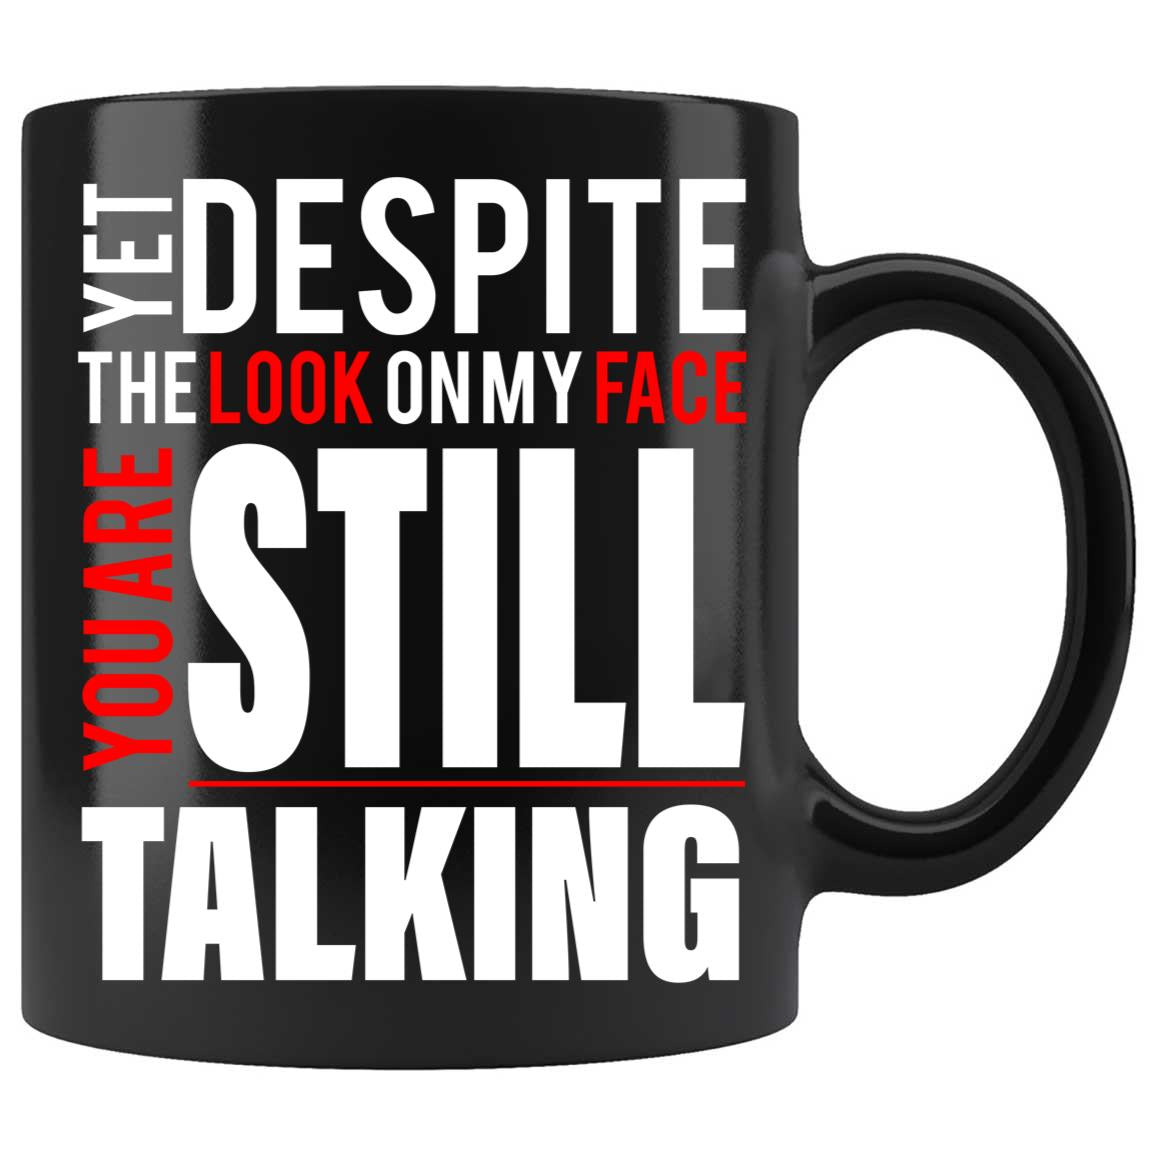 Yet, Despite The Look On My Face Funny Coffee Mug